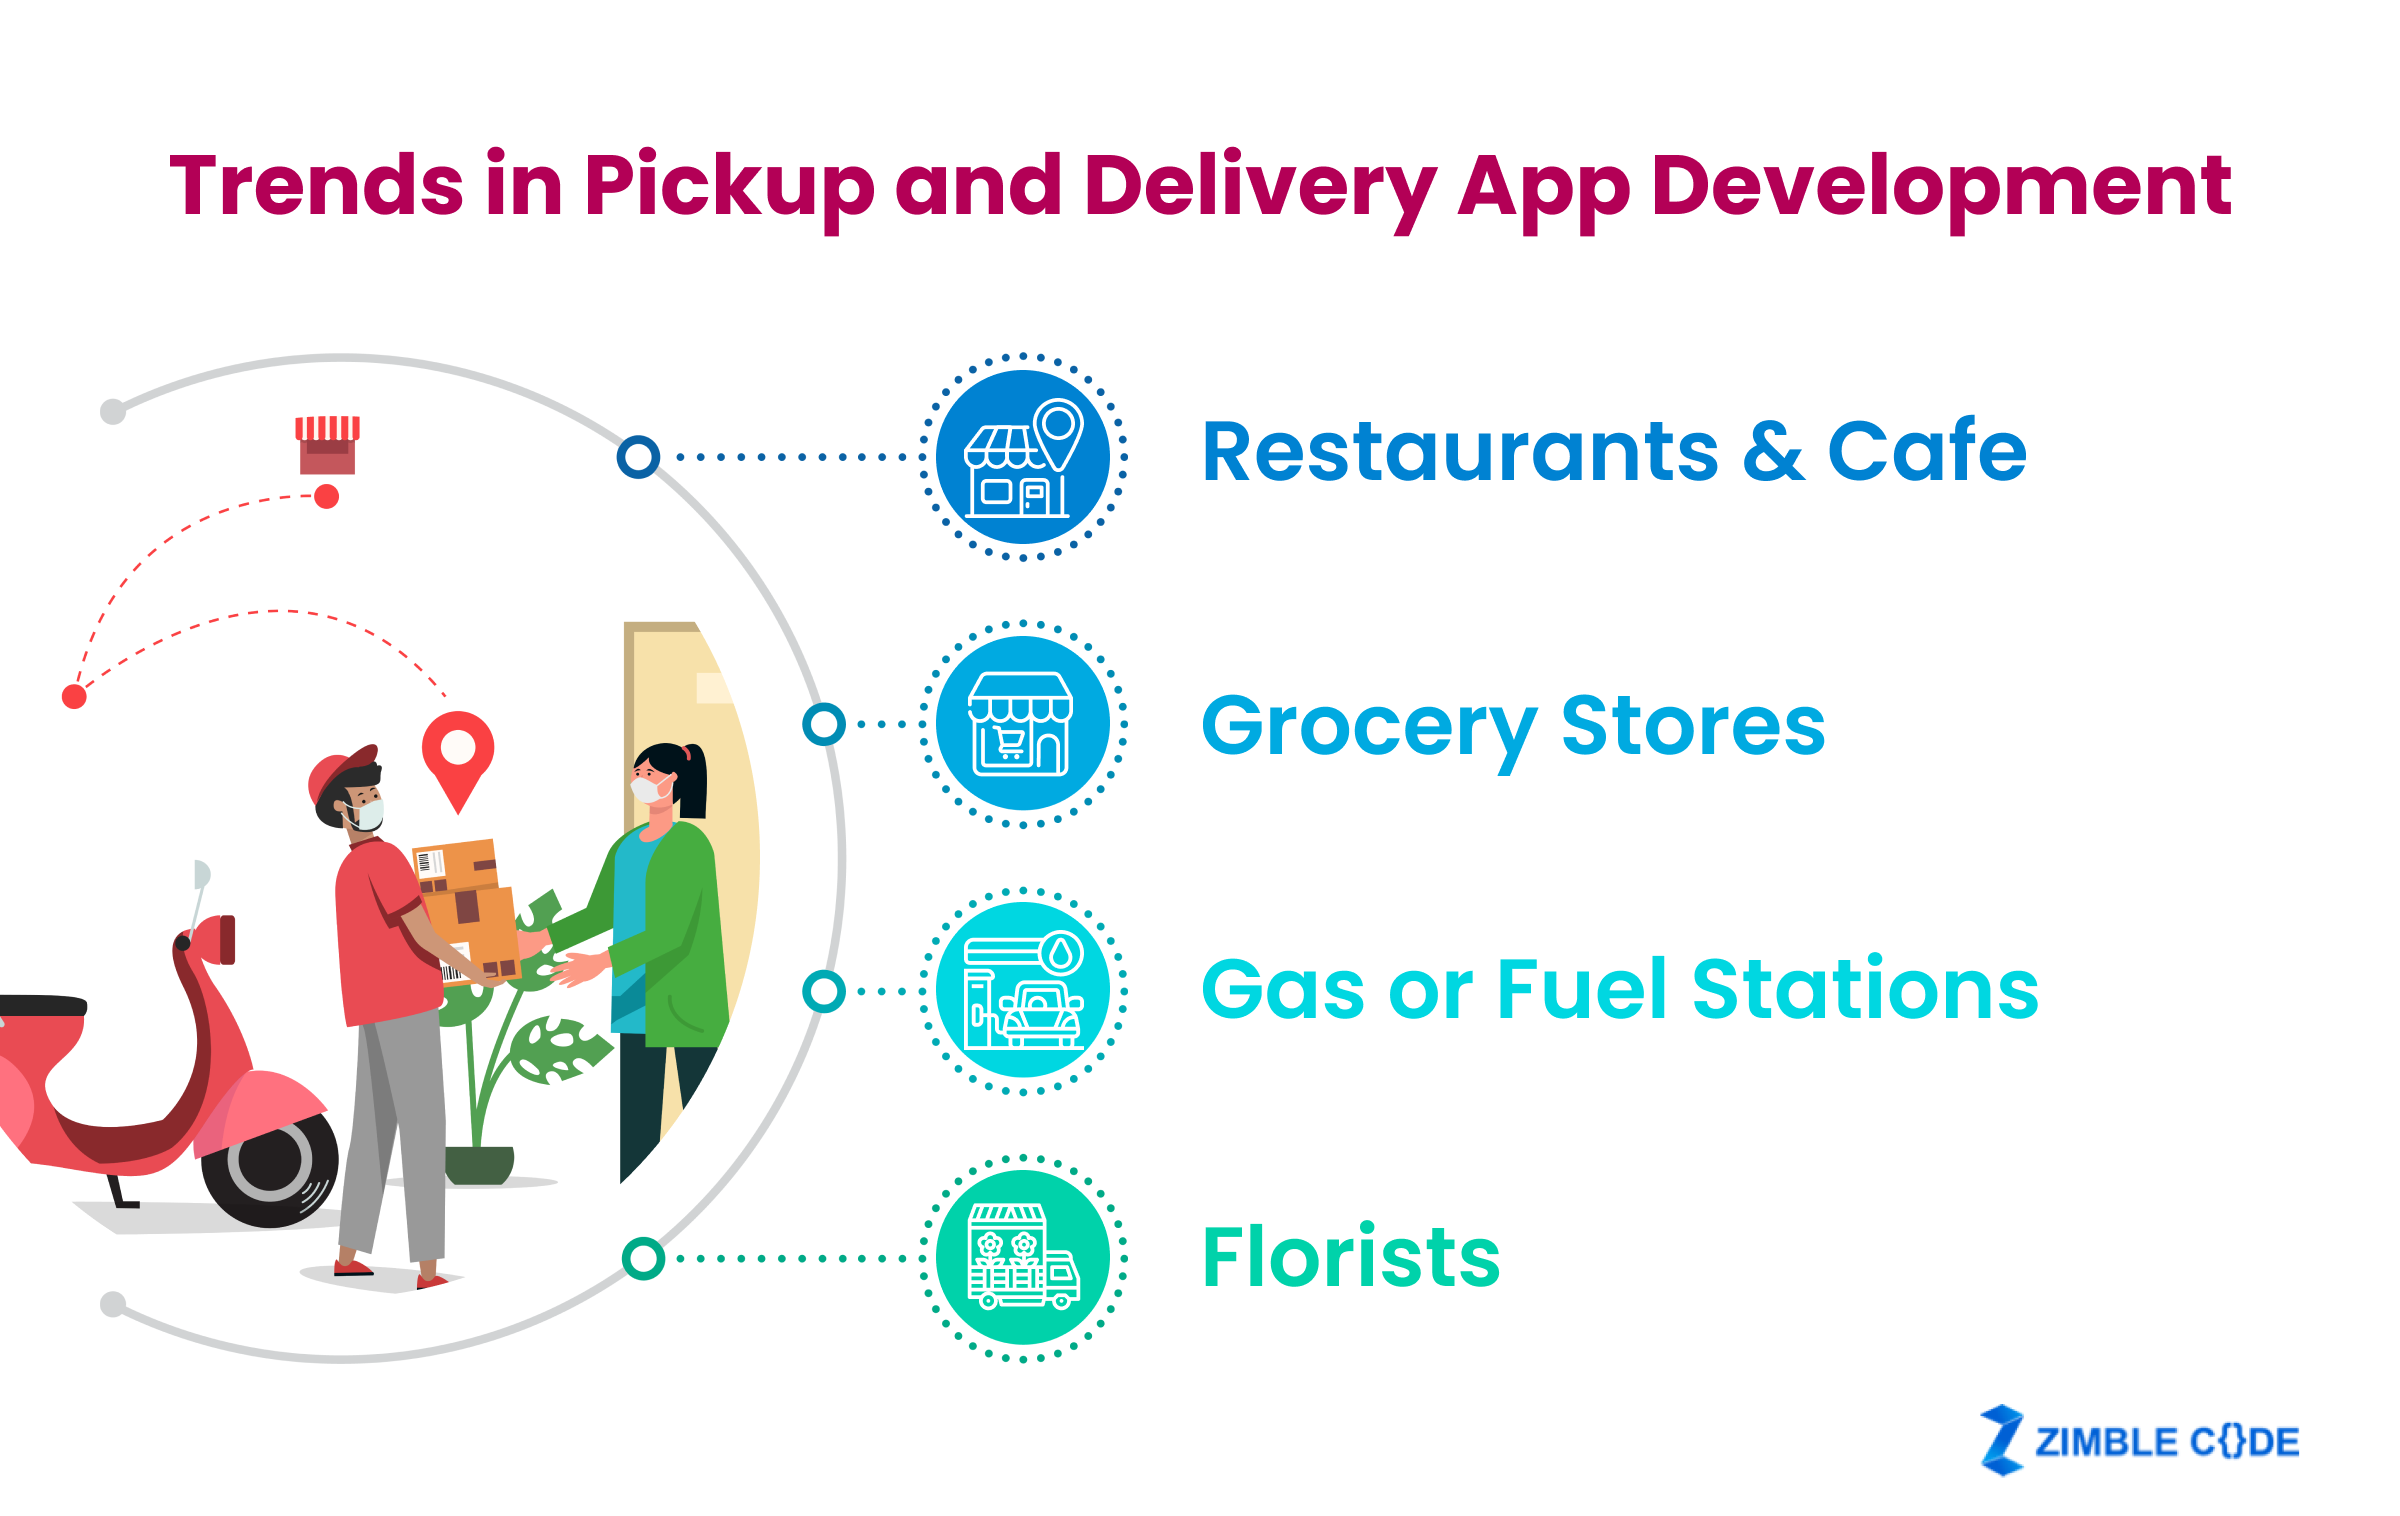 Trends in Pickup and Delivery App Development